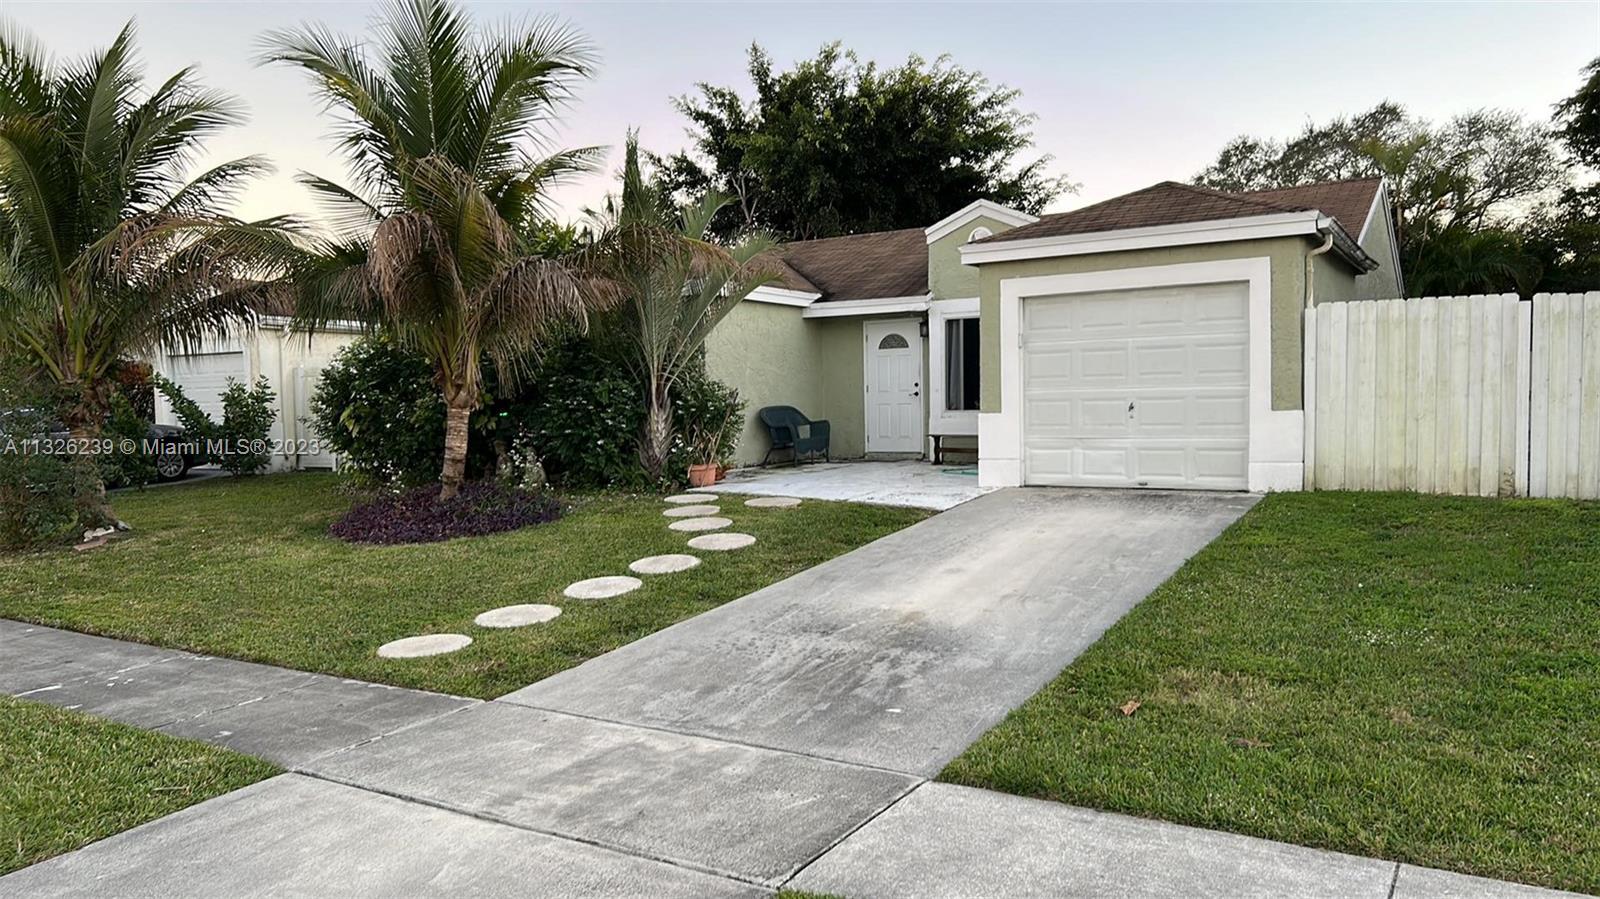 2 beds 2 bath HOME in desirable west Boca Raton neighborhood. LARGE FENCED BACK & SIDE YARD with a c